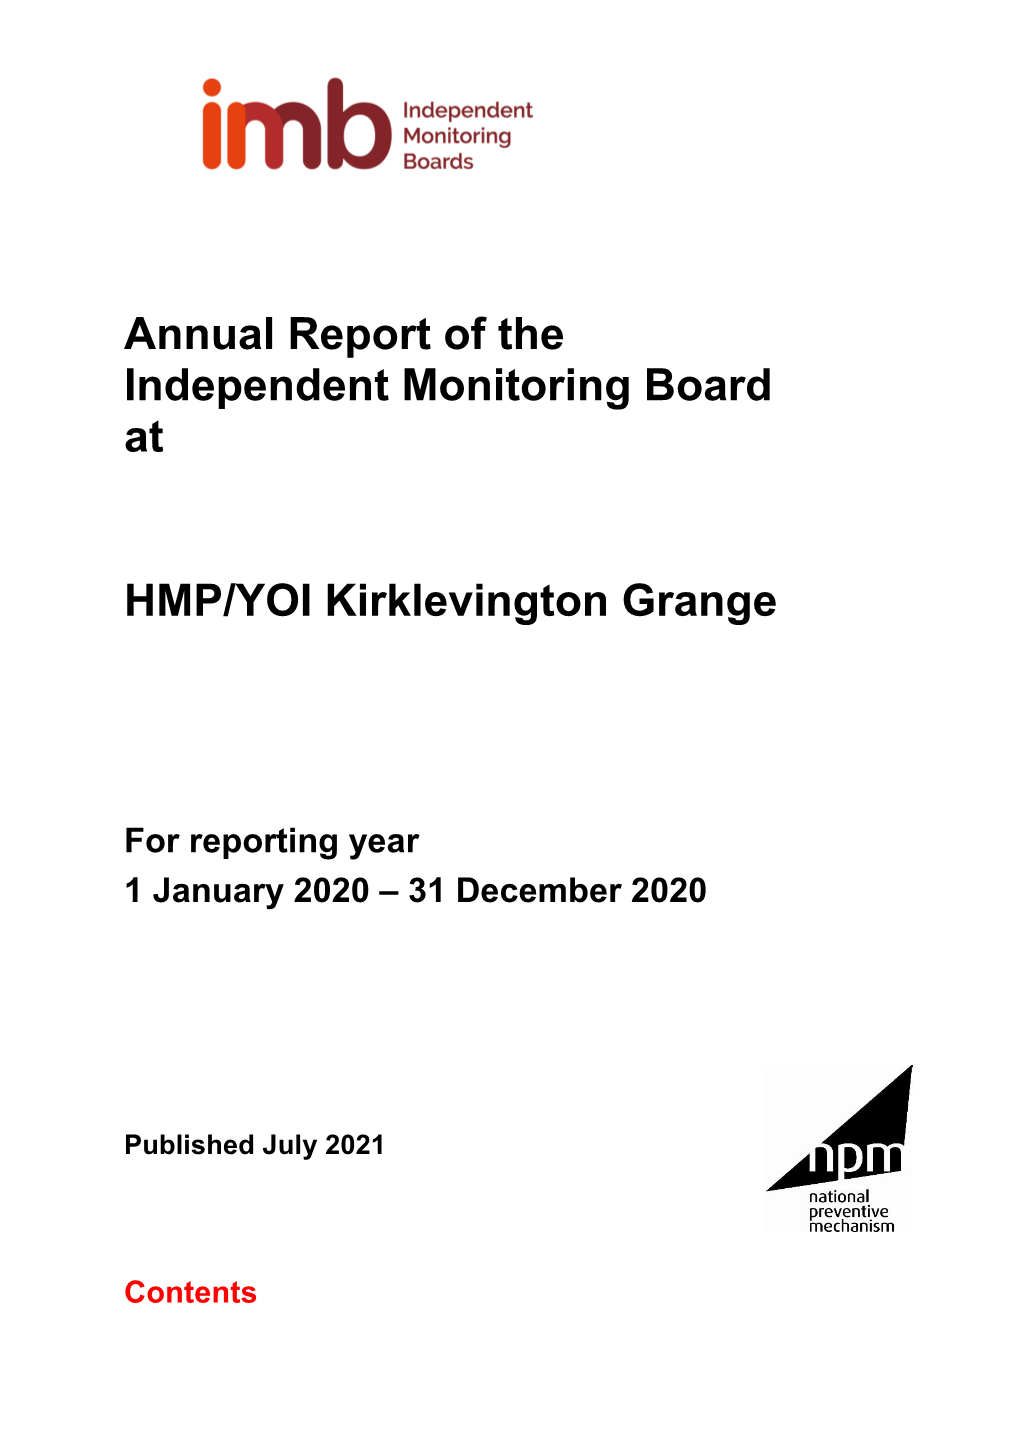 Annual Report of the Independent Monitoring Board at HMP/YOI